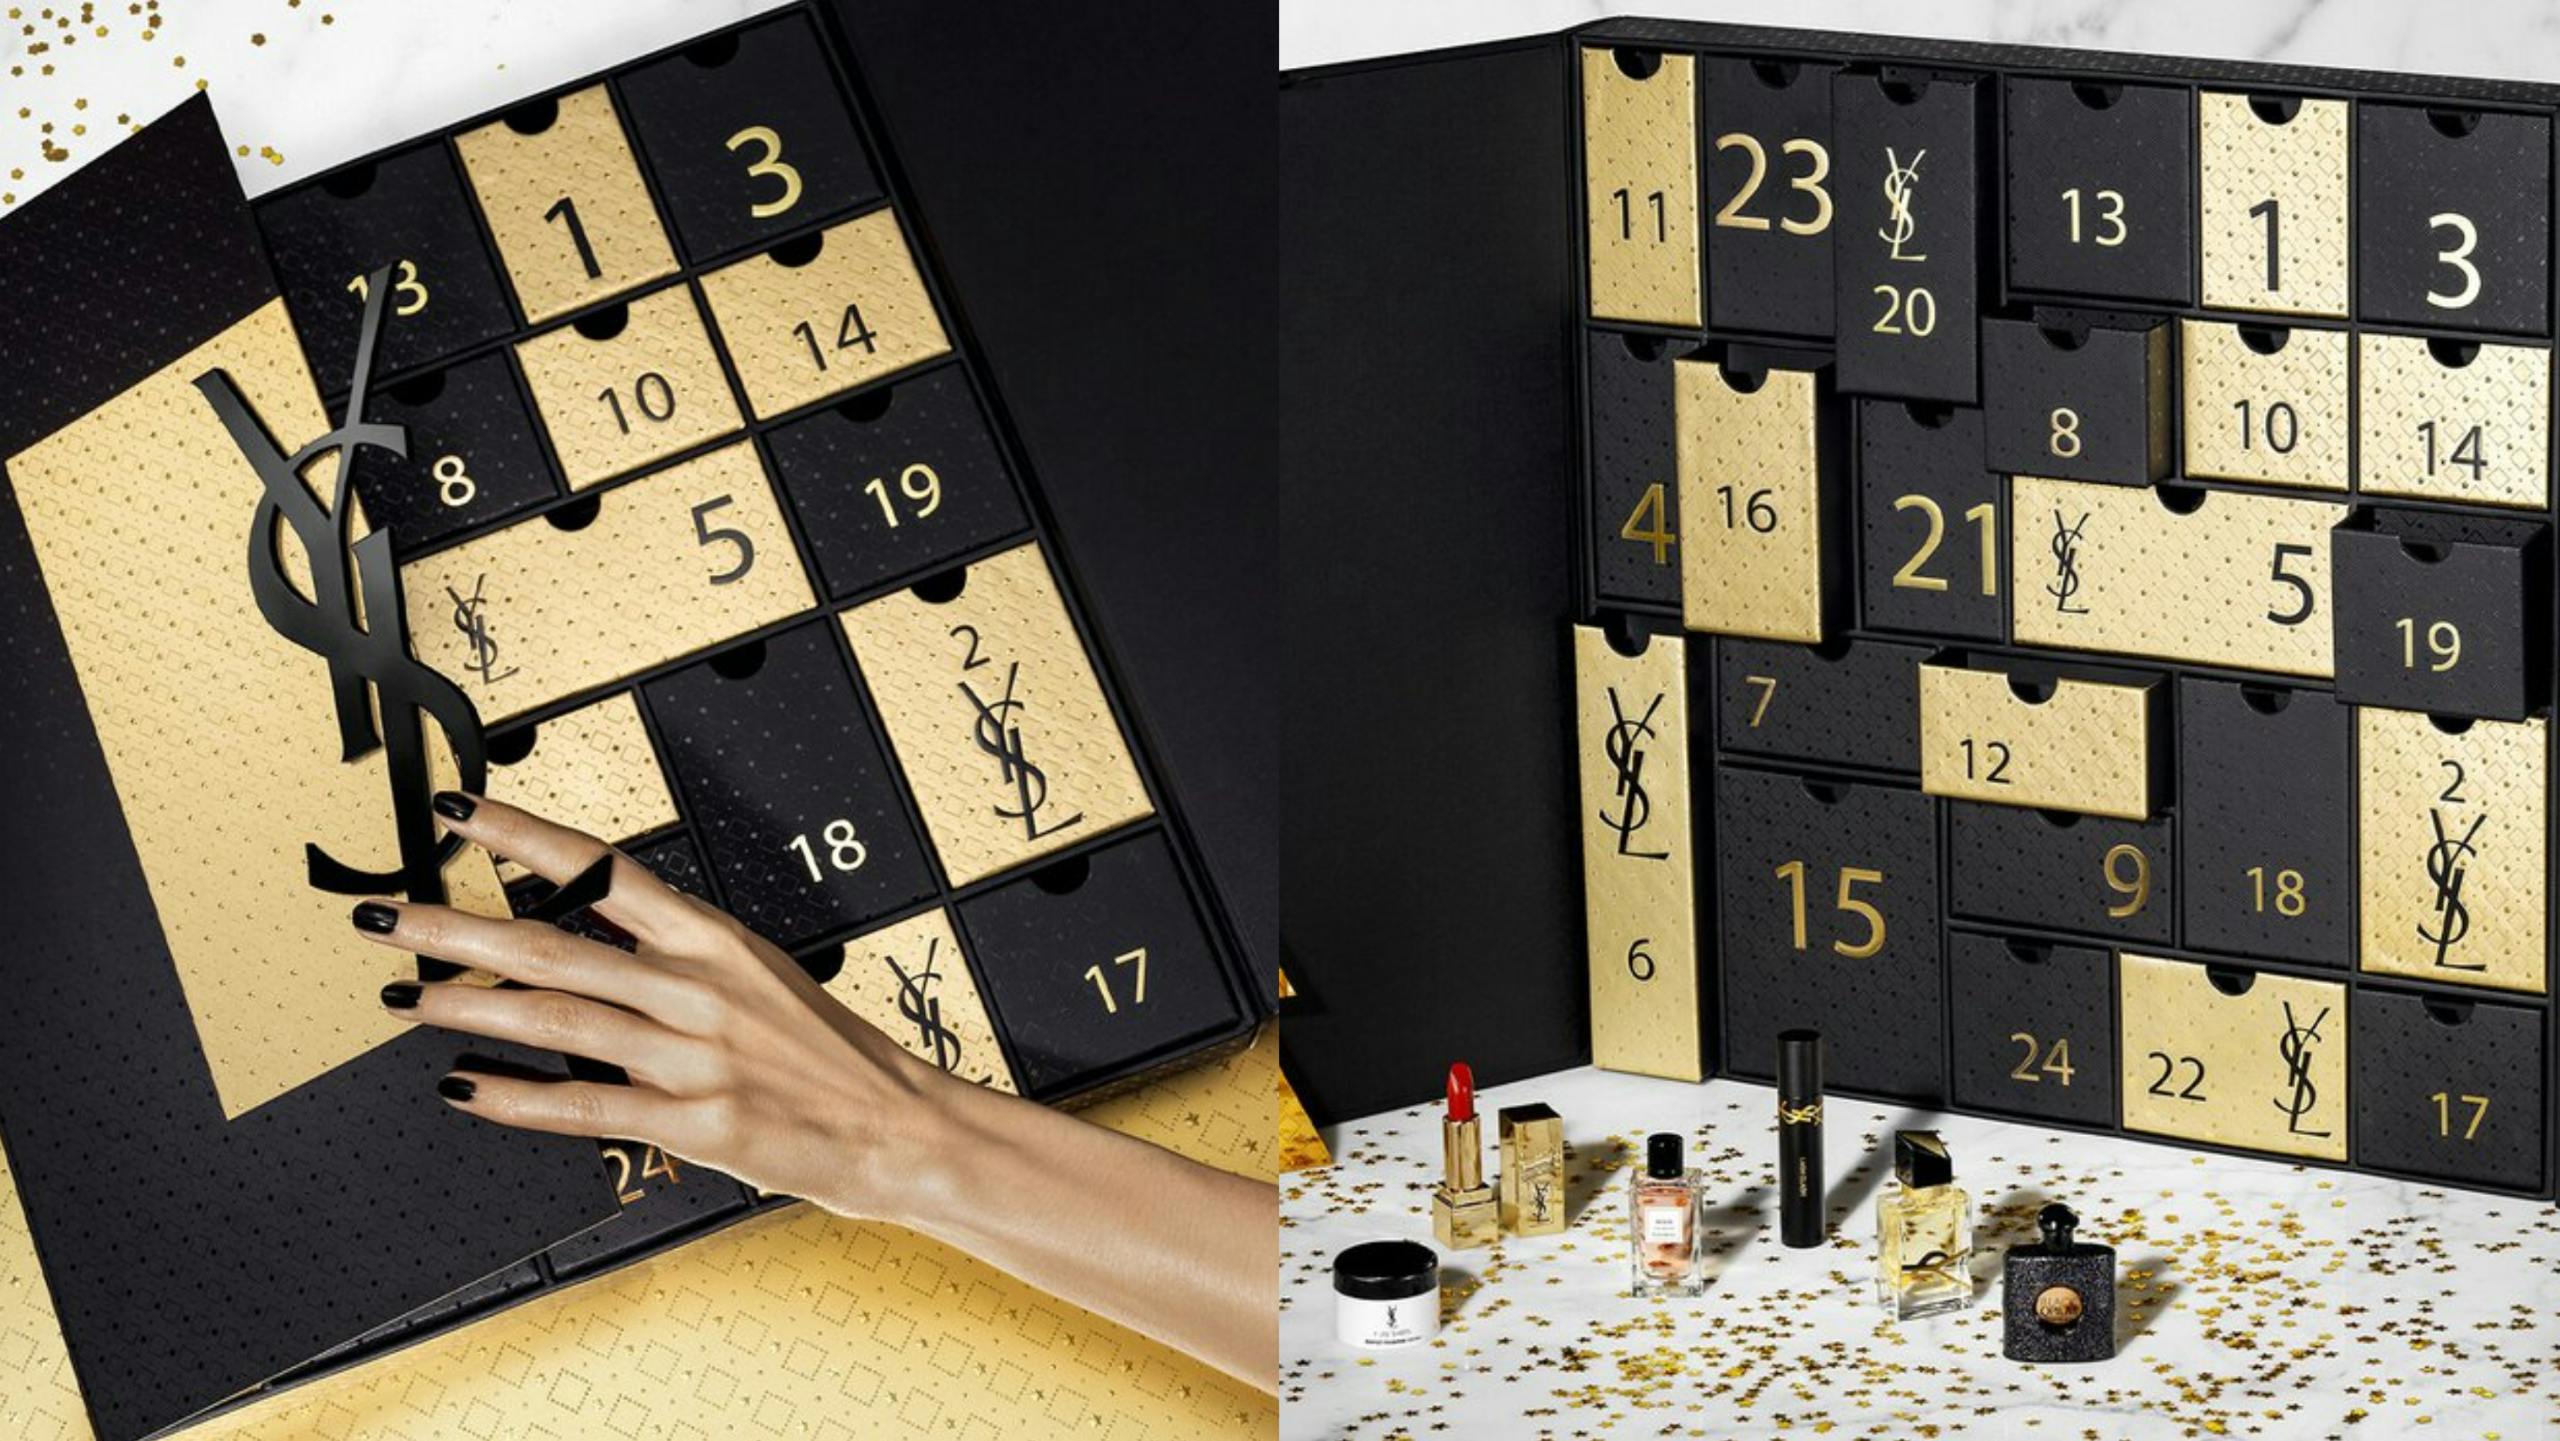 THEY DID IT AGAIN UNBOXING THE YSL BEAUTY ADVENT CALENDAR 2023